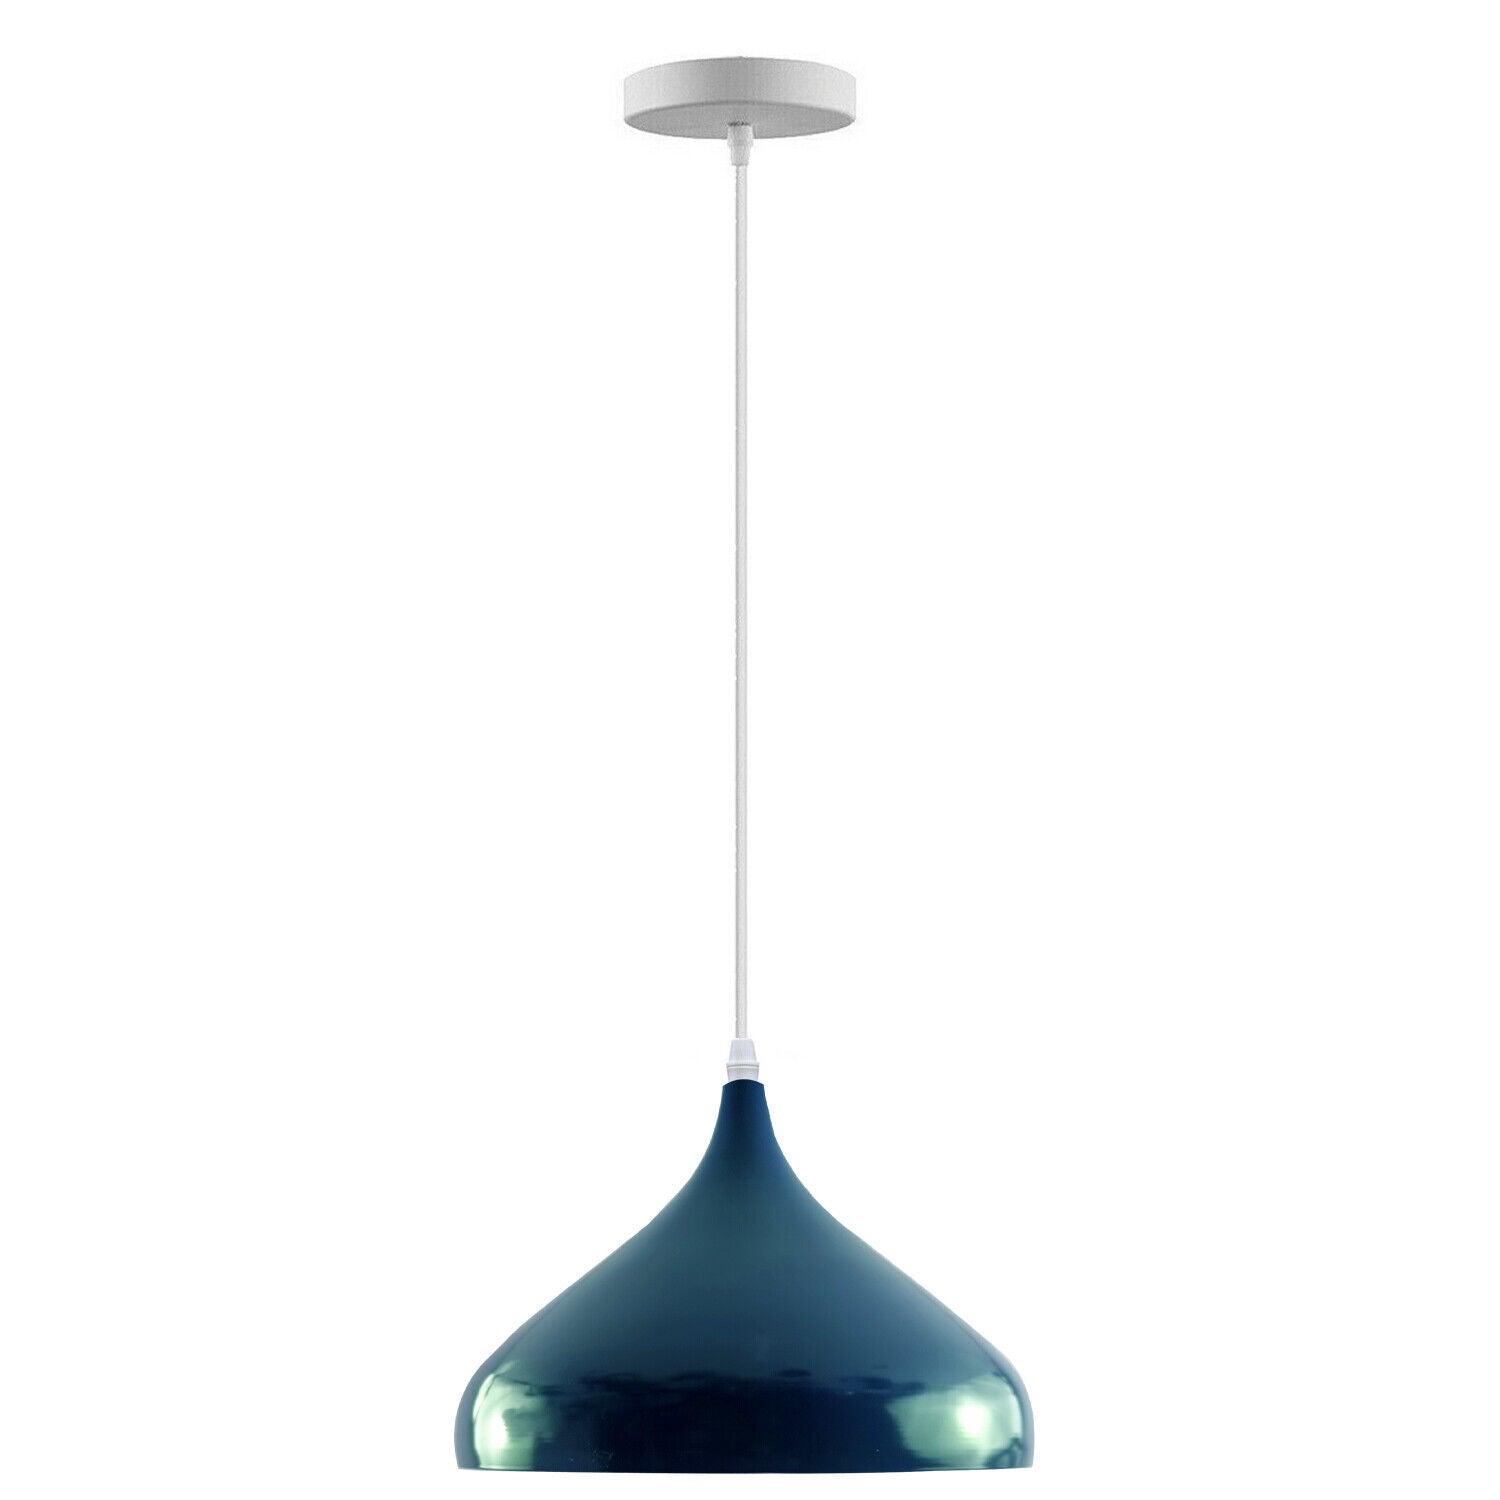 Teal Cyan Blue Ceiling Metal Pendant Shade for Kitchen